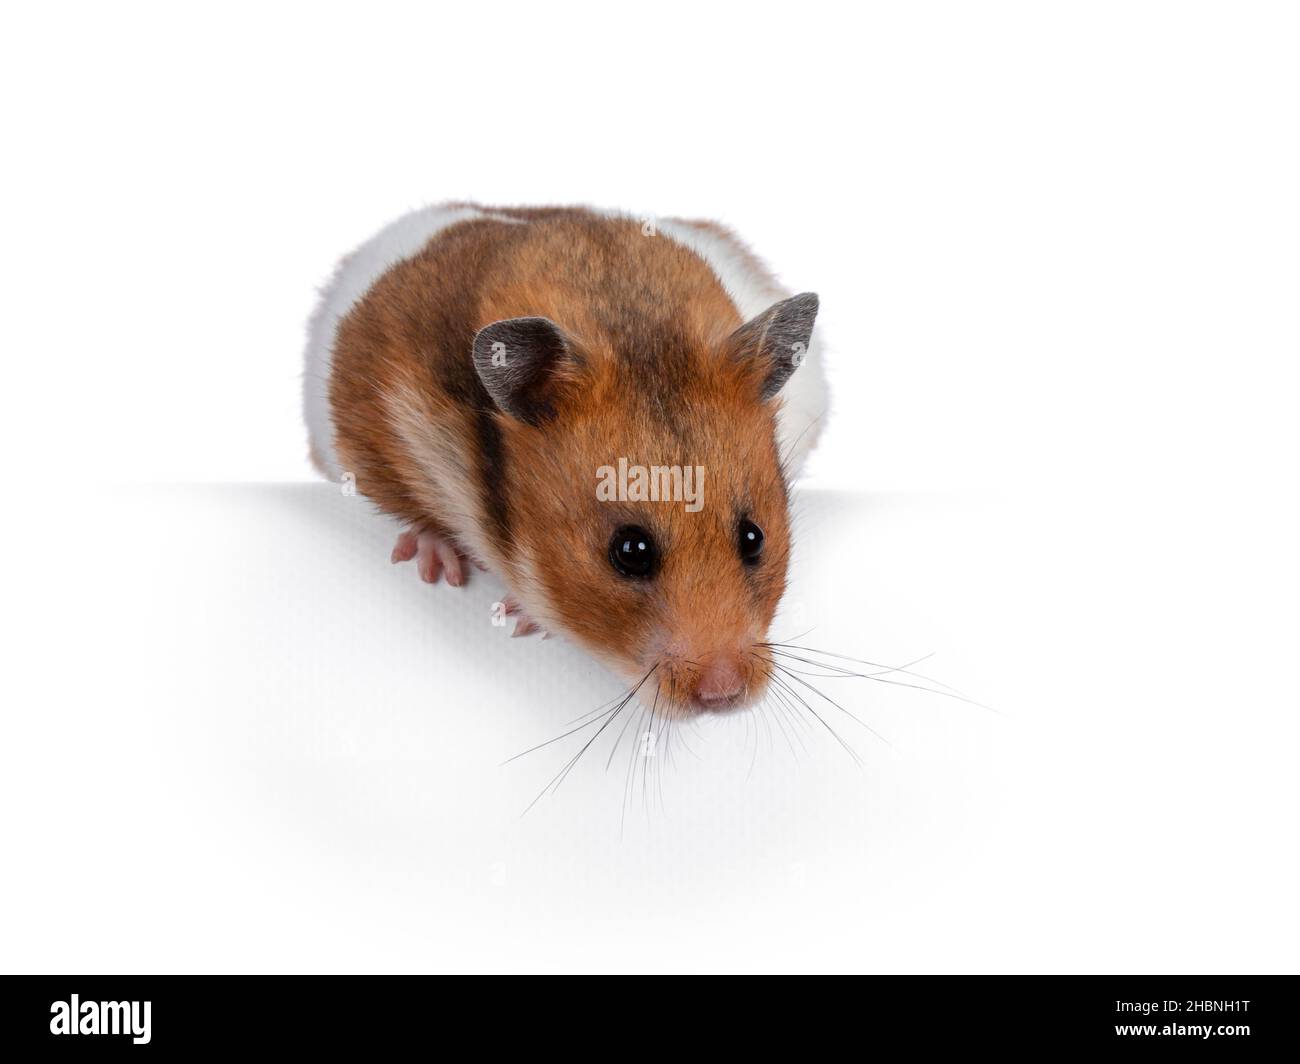 Cute Syrian or golden hamster, sitting on edge. Looking down straight away from camera. Isolated on a white background. Stock Photo